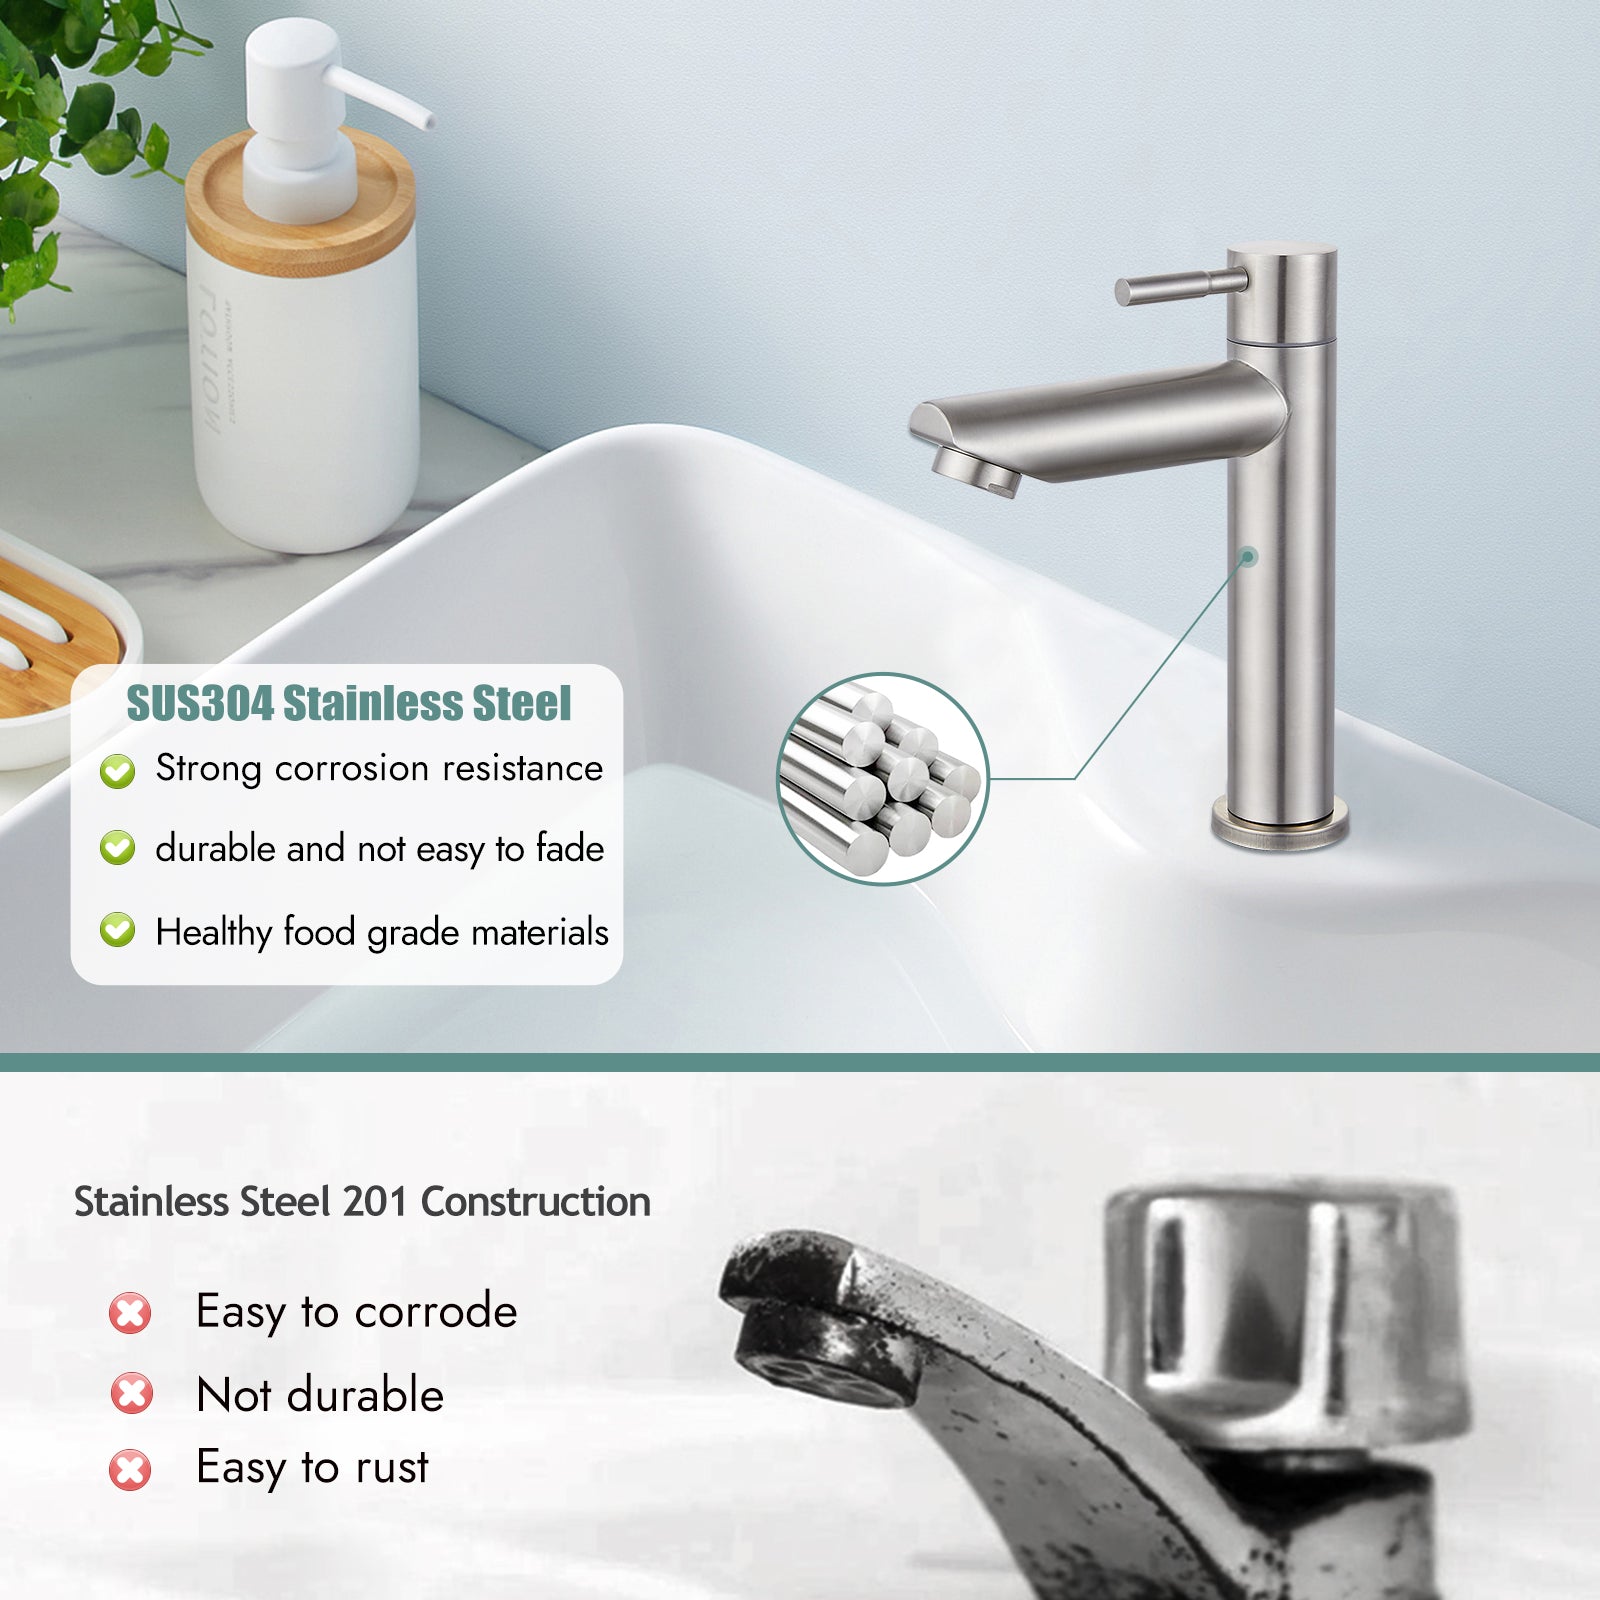 Cold Water Only Bathroom Sink Faucet Stainless Steel SUS304 Brushed Nickel Single Handle One Hole Deck Mount Lavatory Faucet (Drain Not Included)